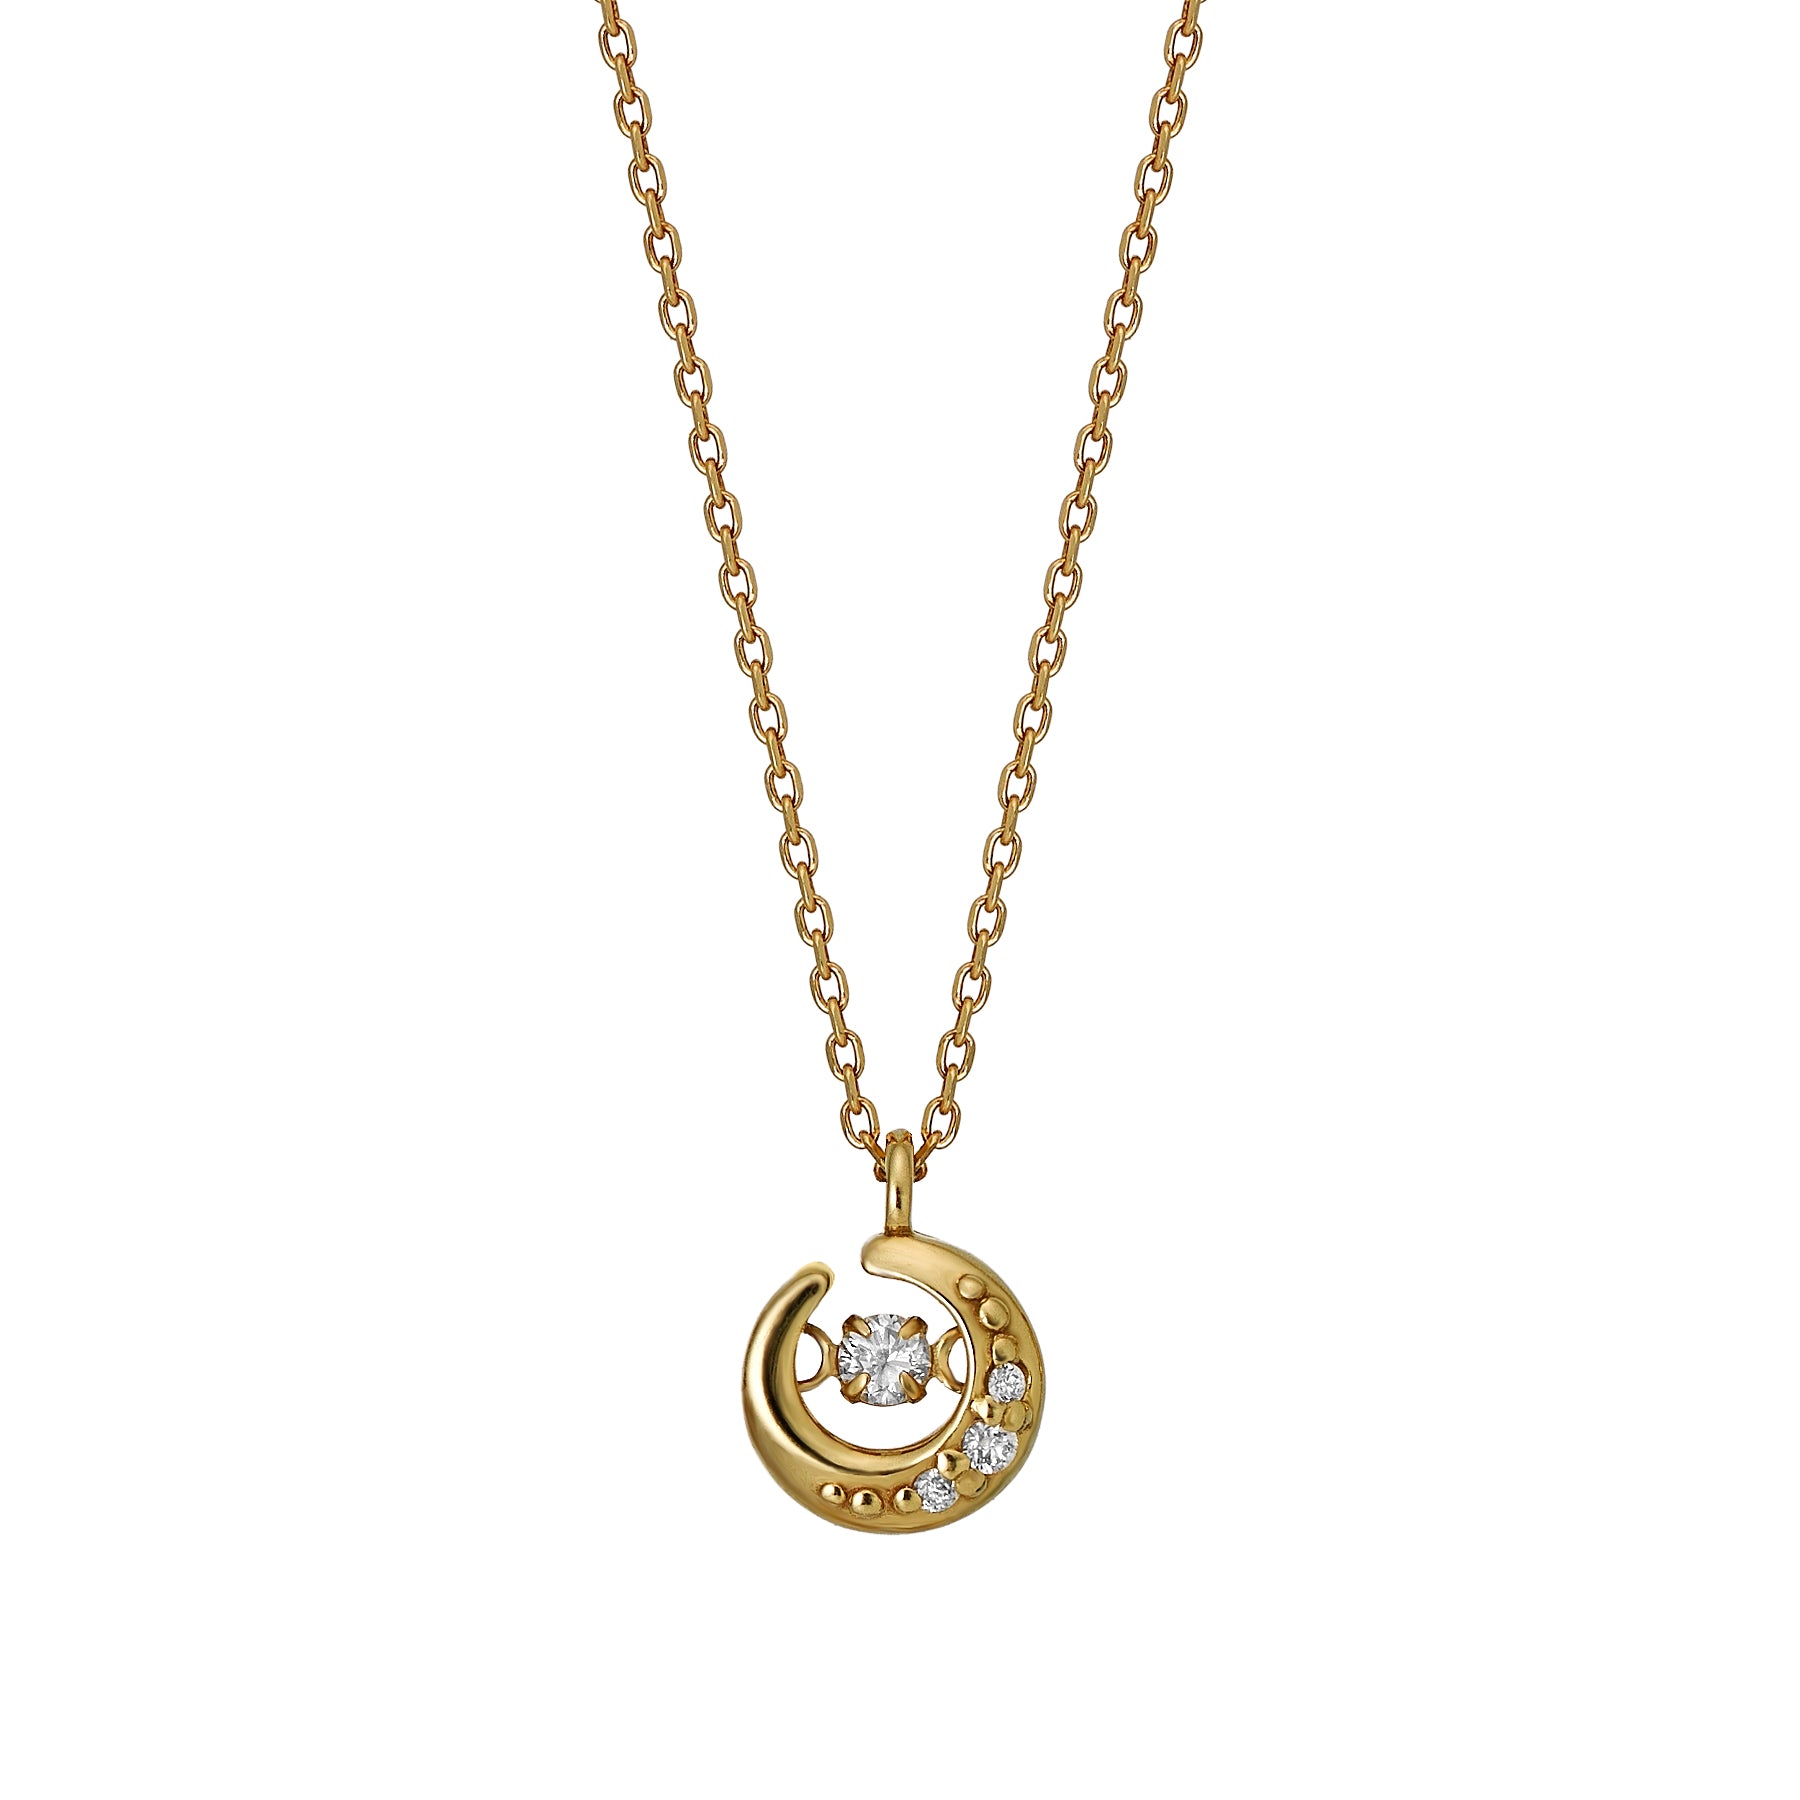 18K Yellow Gold Dancing Diamond Crescent Necklace - Product Image